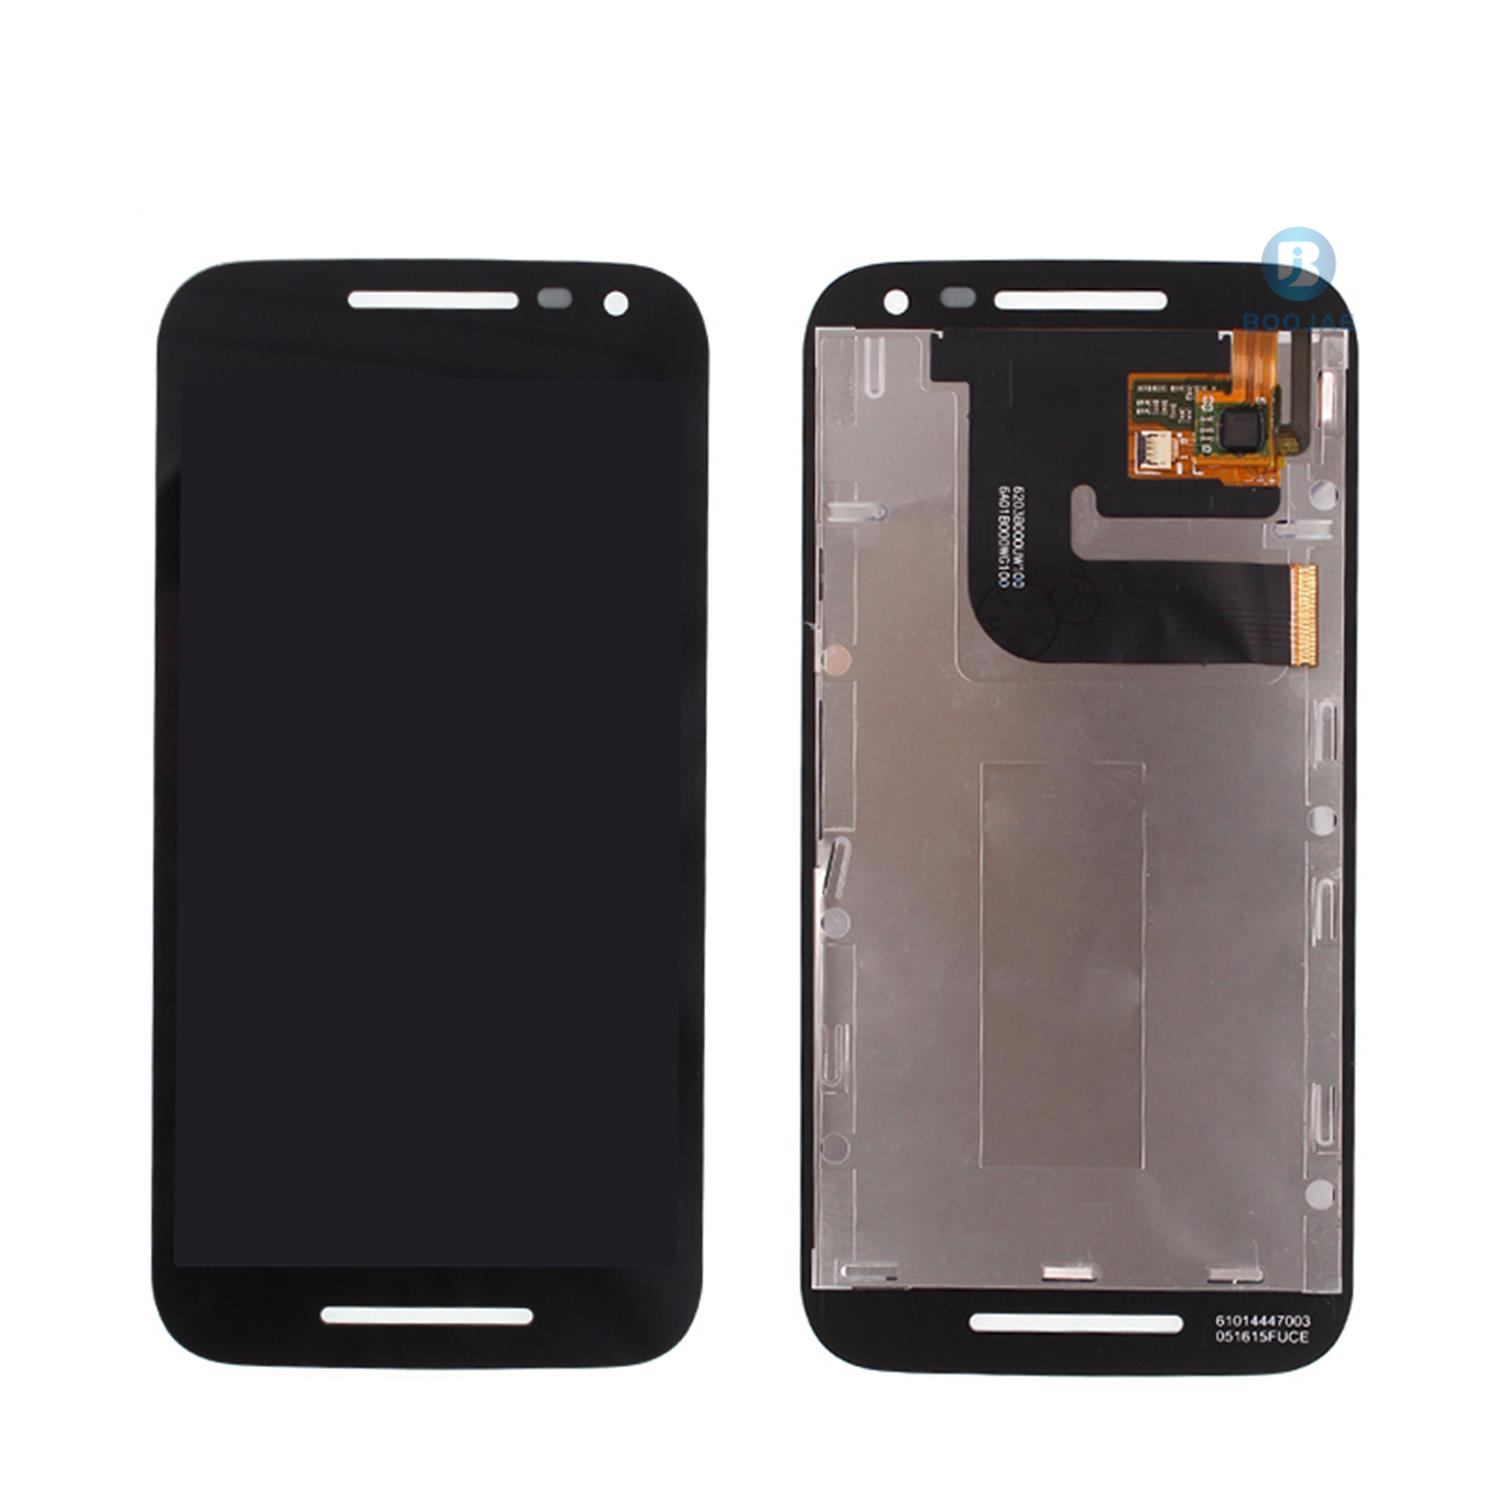 For Motorola Moto G3 LCD Screen Display and Touch Panel Digitizer Assembly Replacement